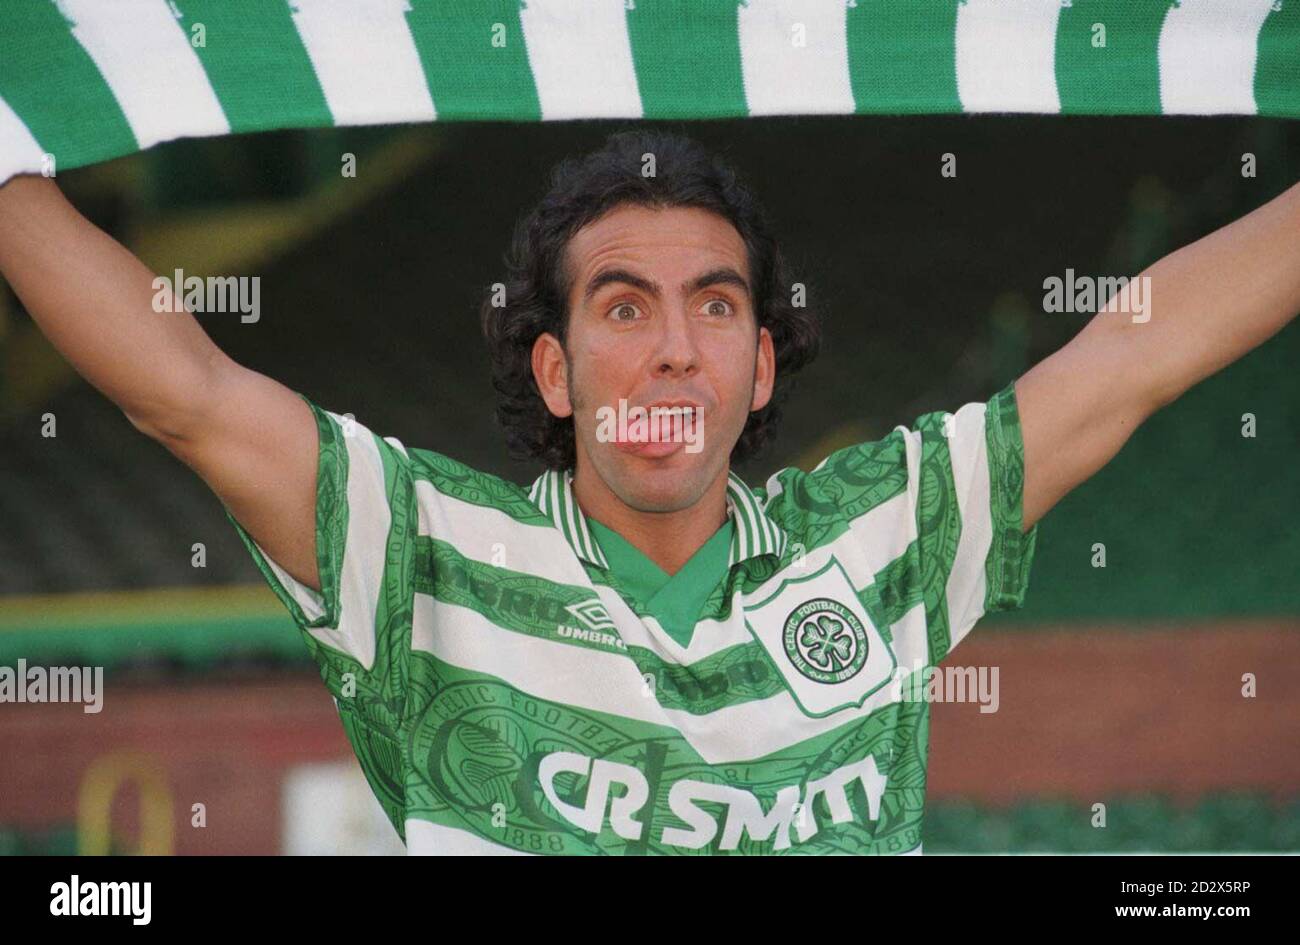 PAOLO DI CANIO SHEFFIELD WEDNESDAY FC 15 August 1997 Stock Photo - Alamy